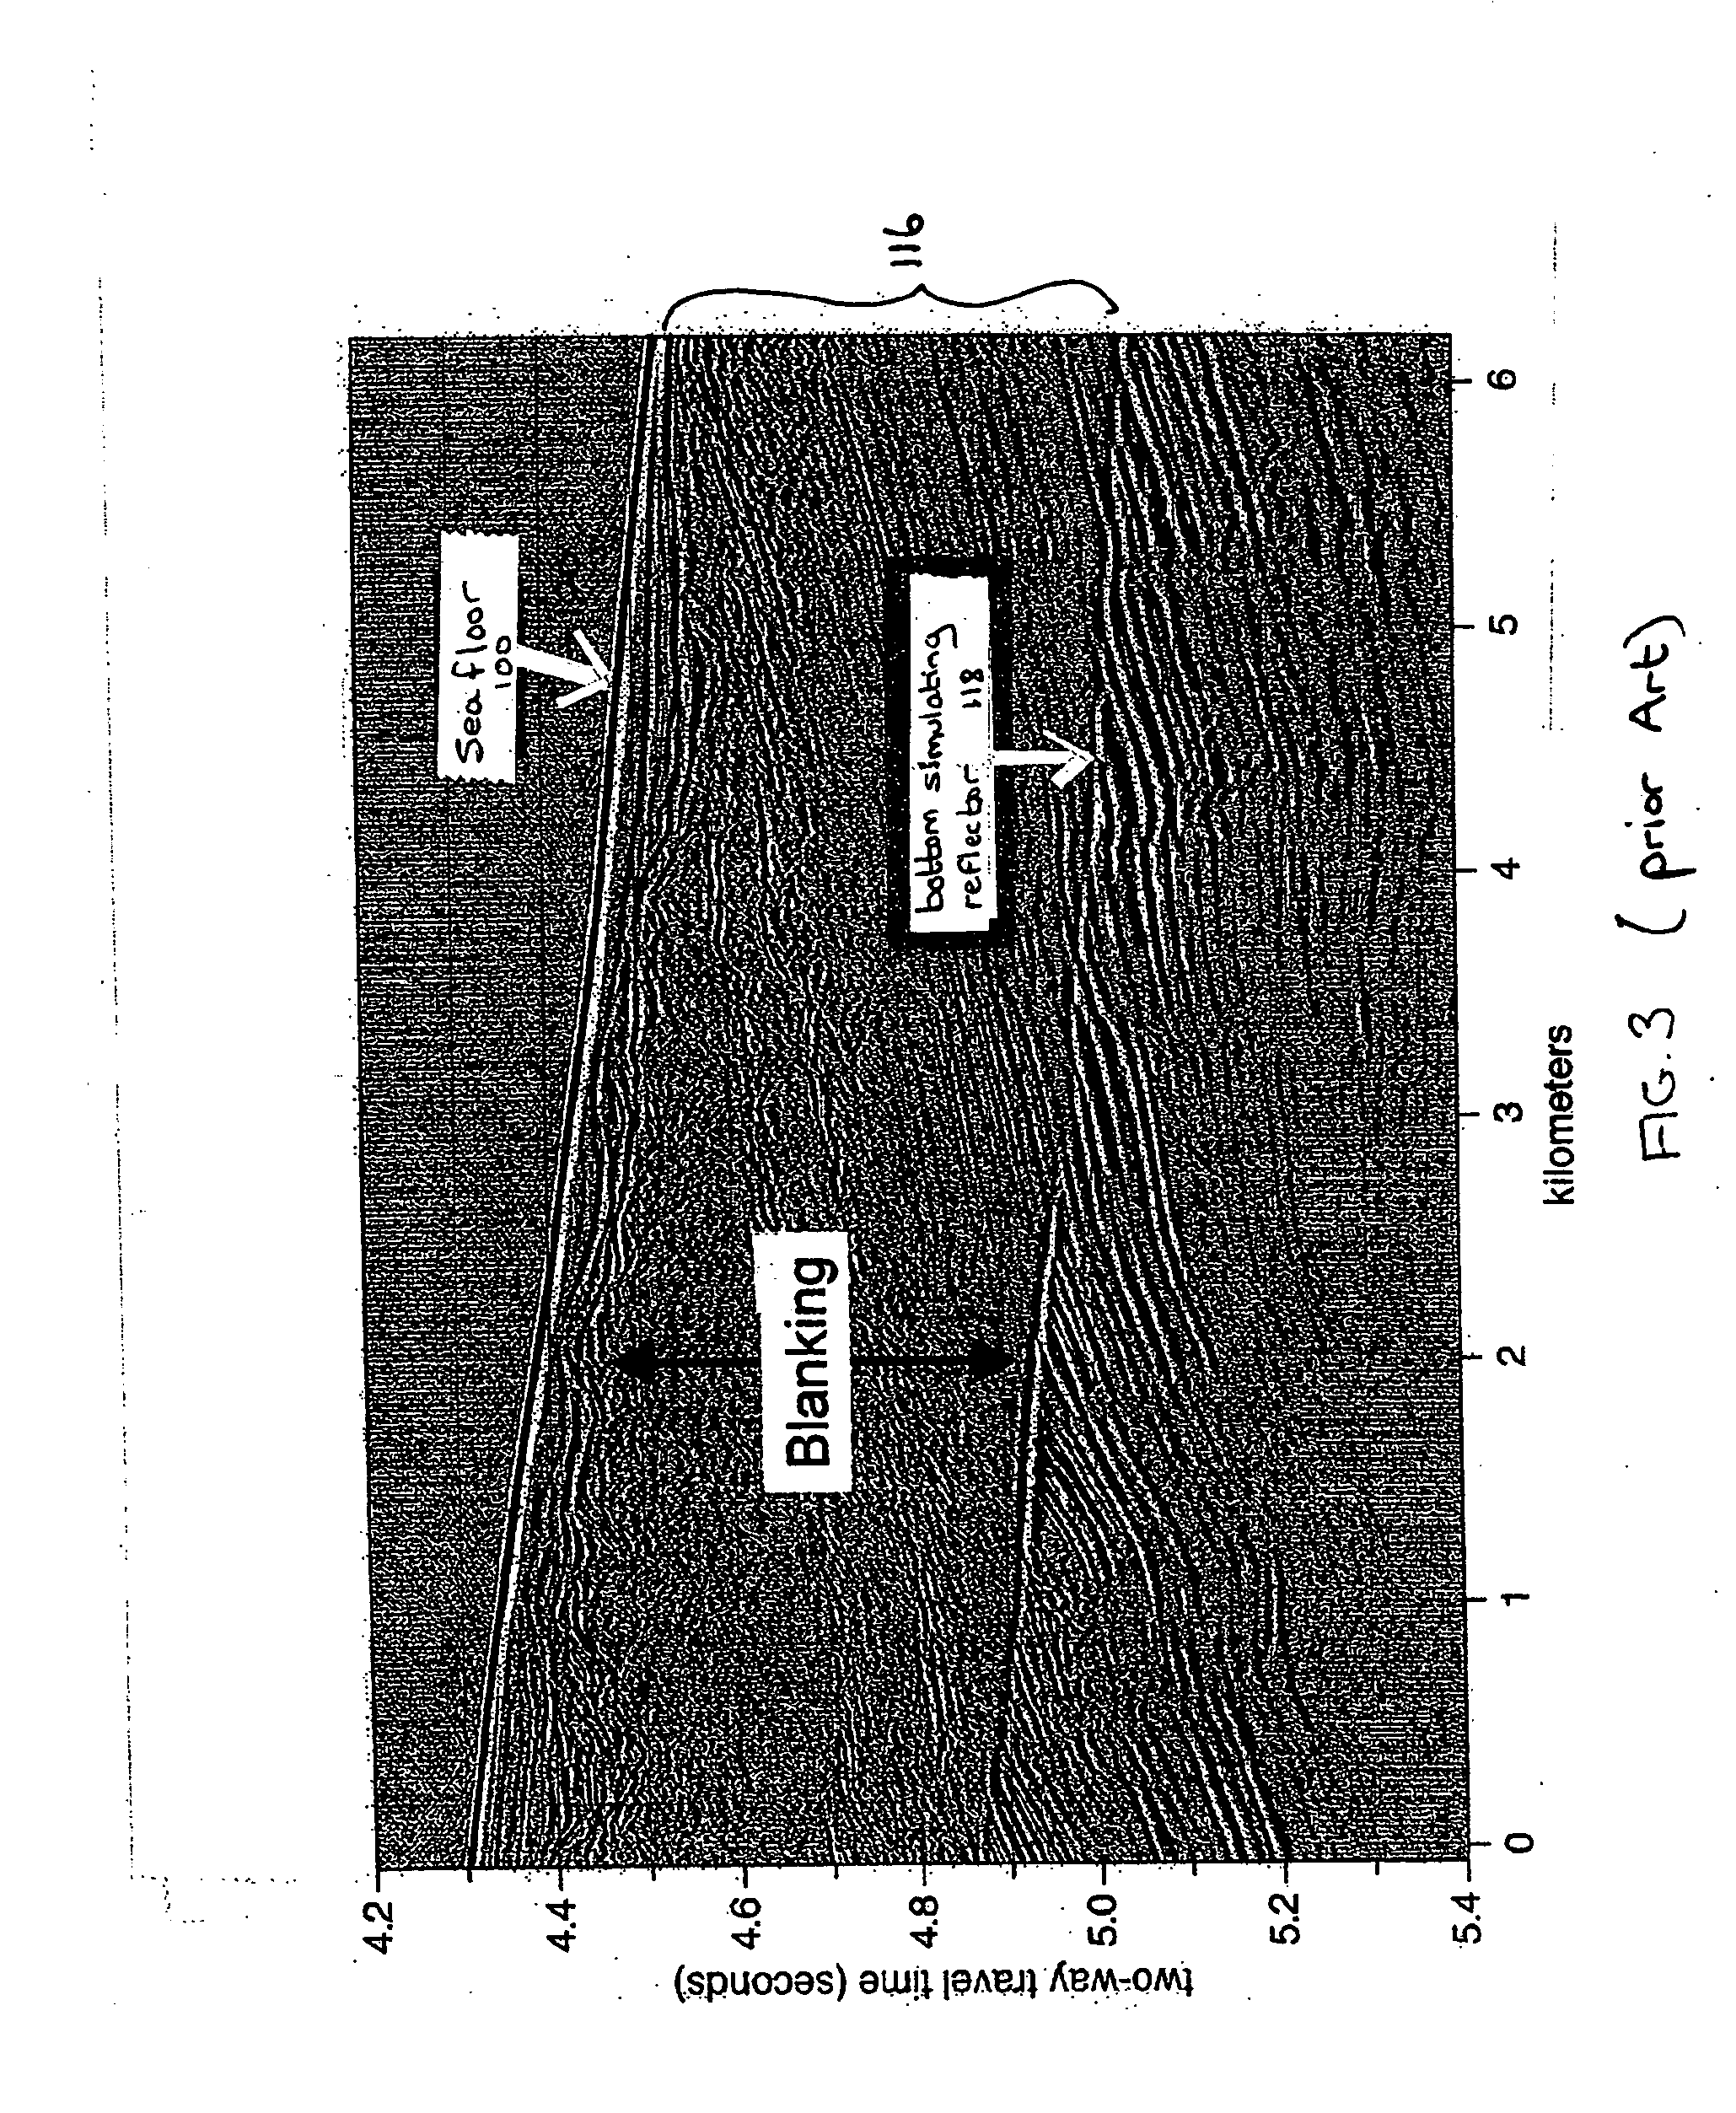 Method and apparatus for locating gas hydrate